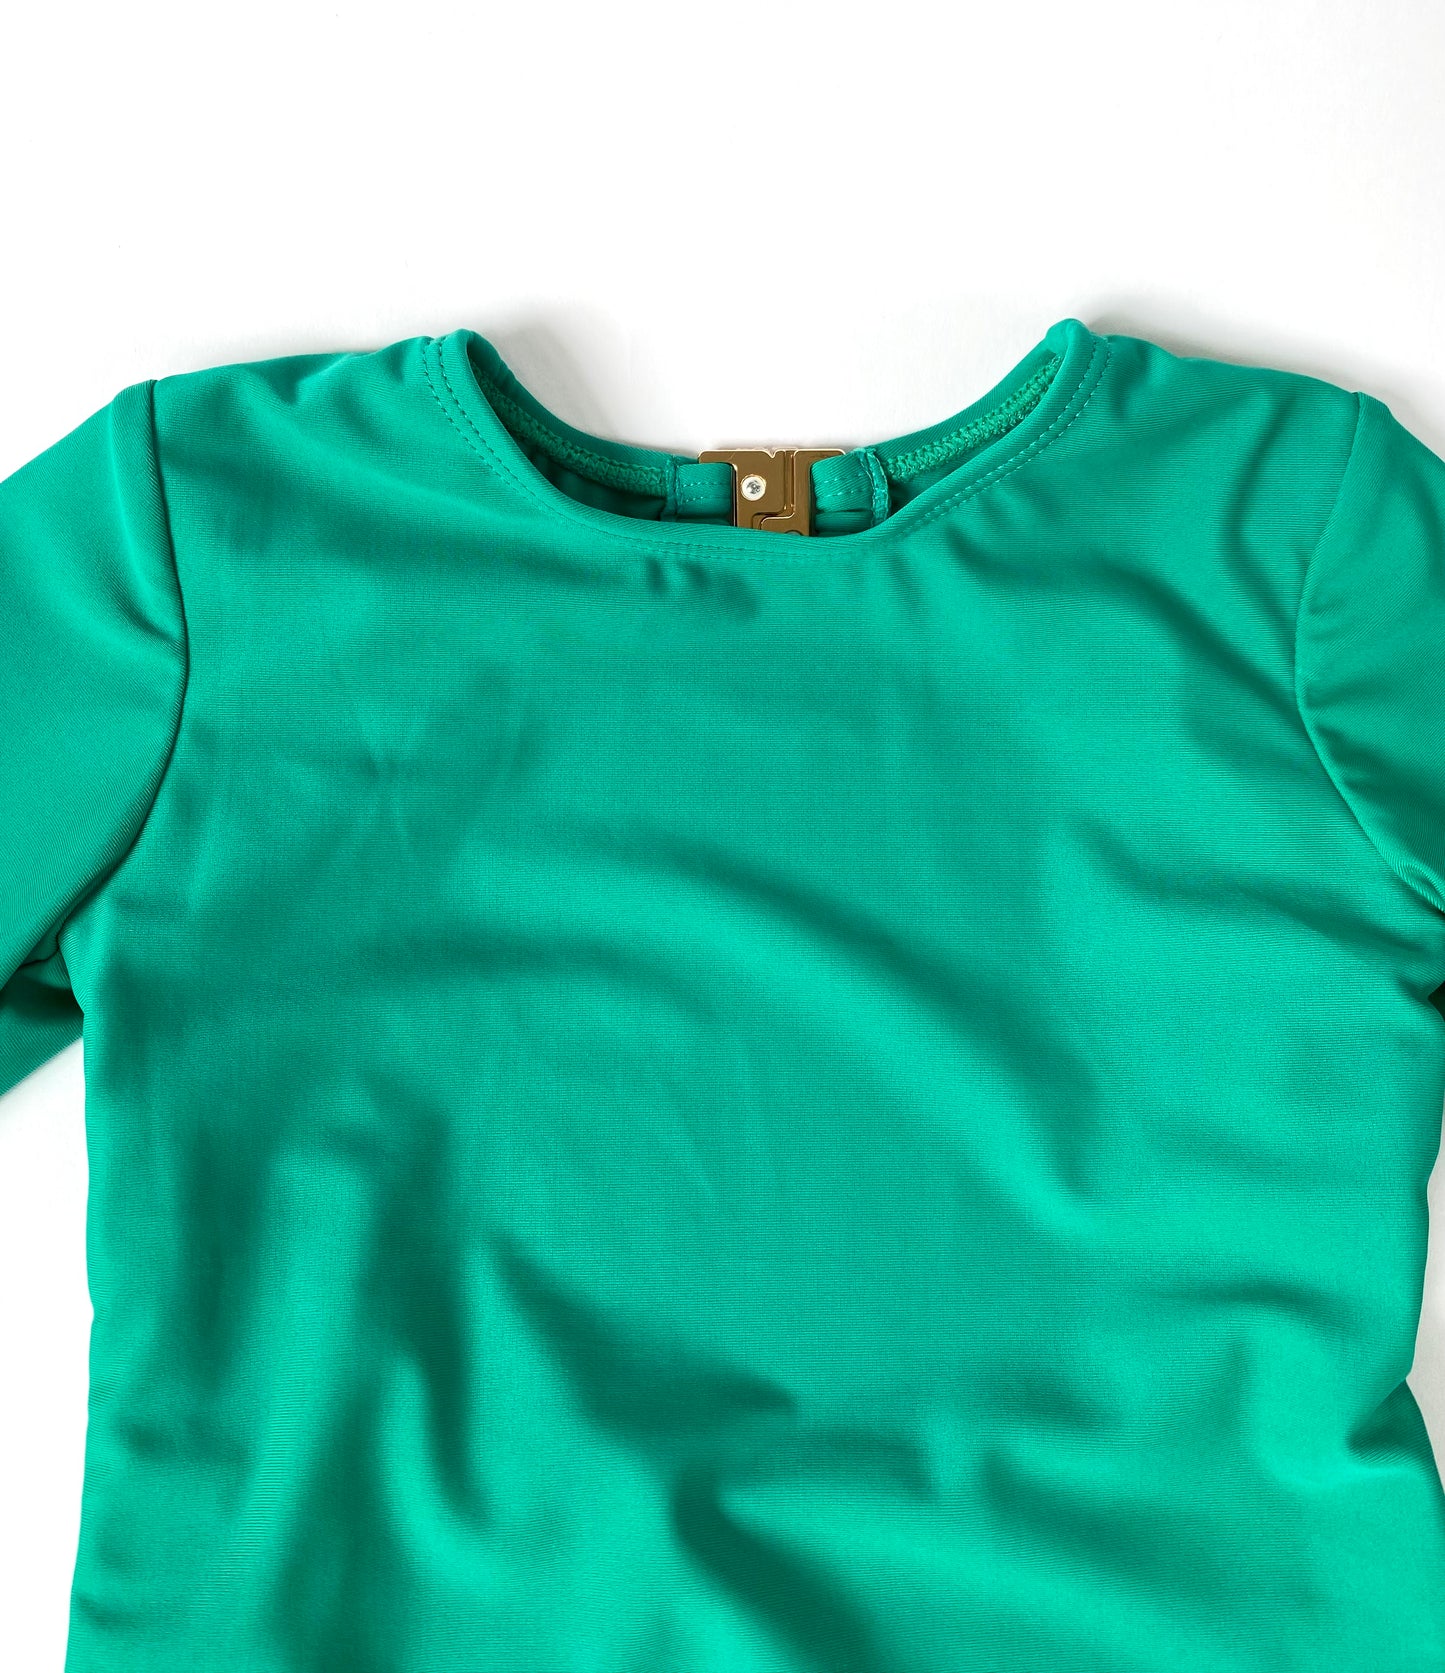 Mesa Long Sleeve Open Back One Piece In Medium Teal